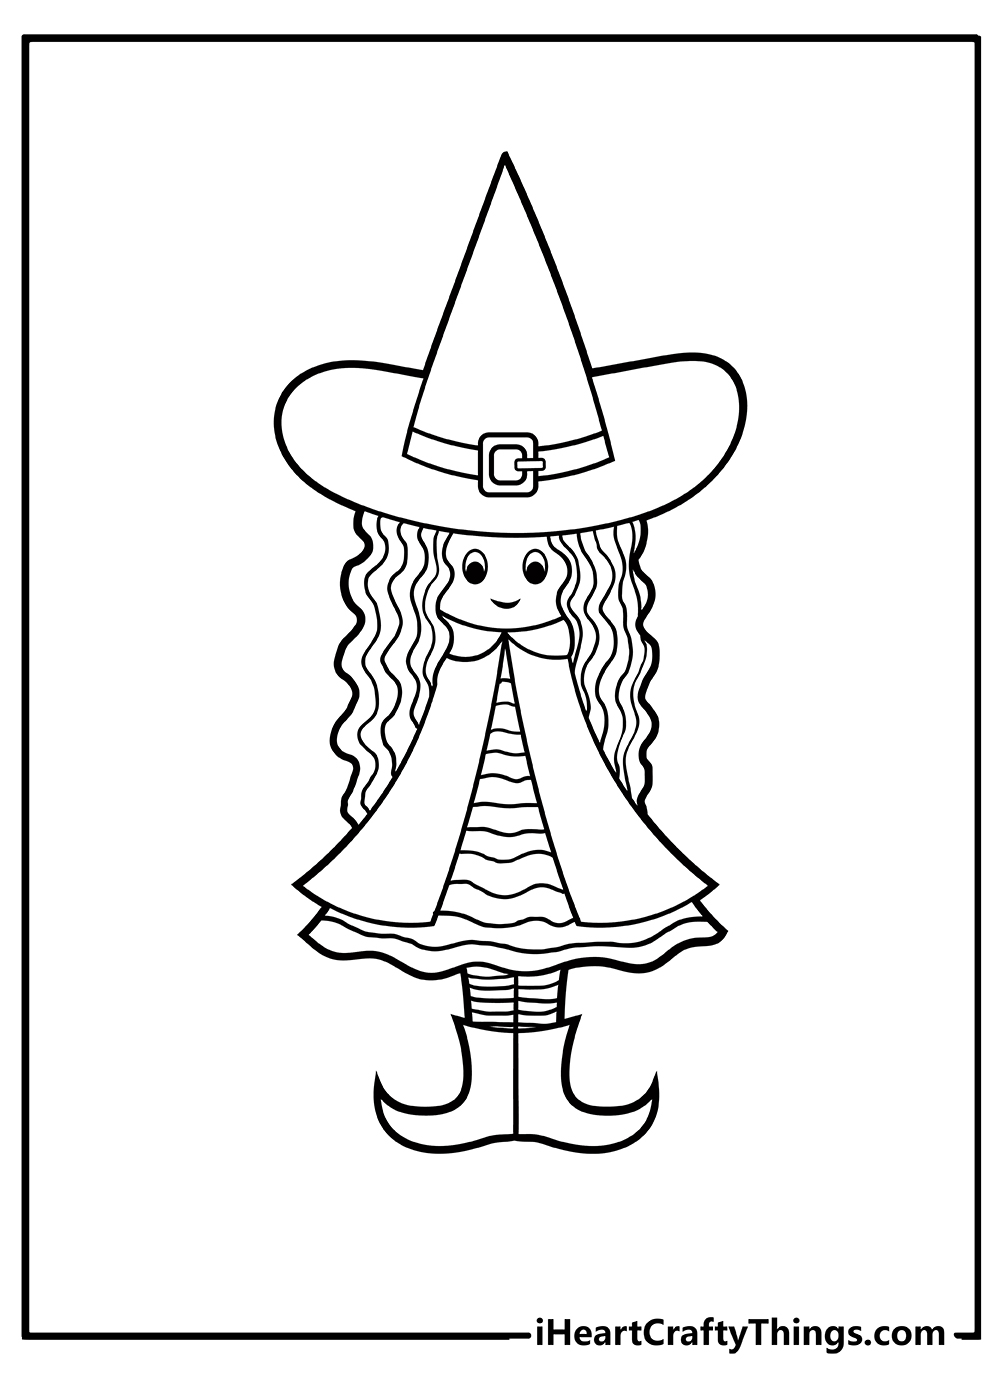 Witch Coloring Original Sheet for children free download